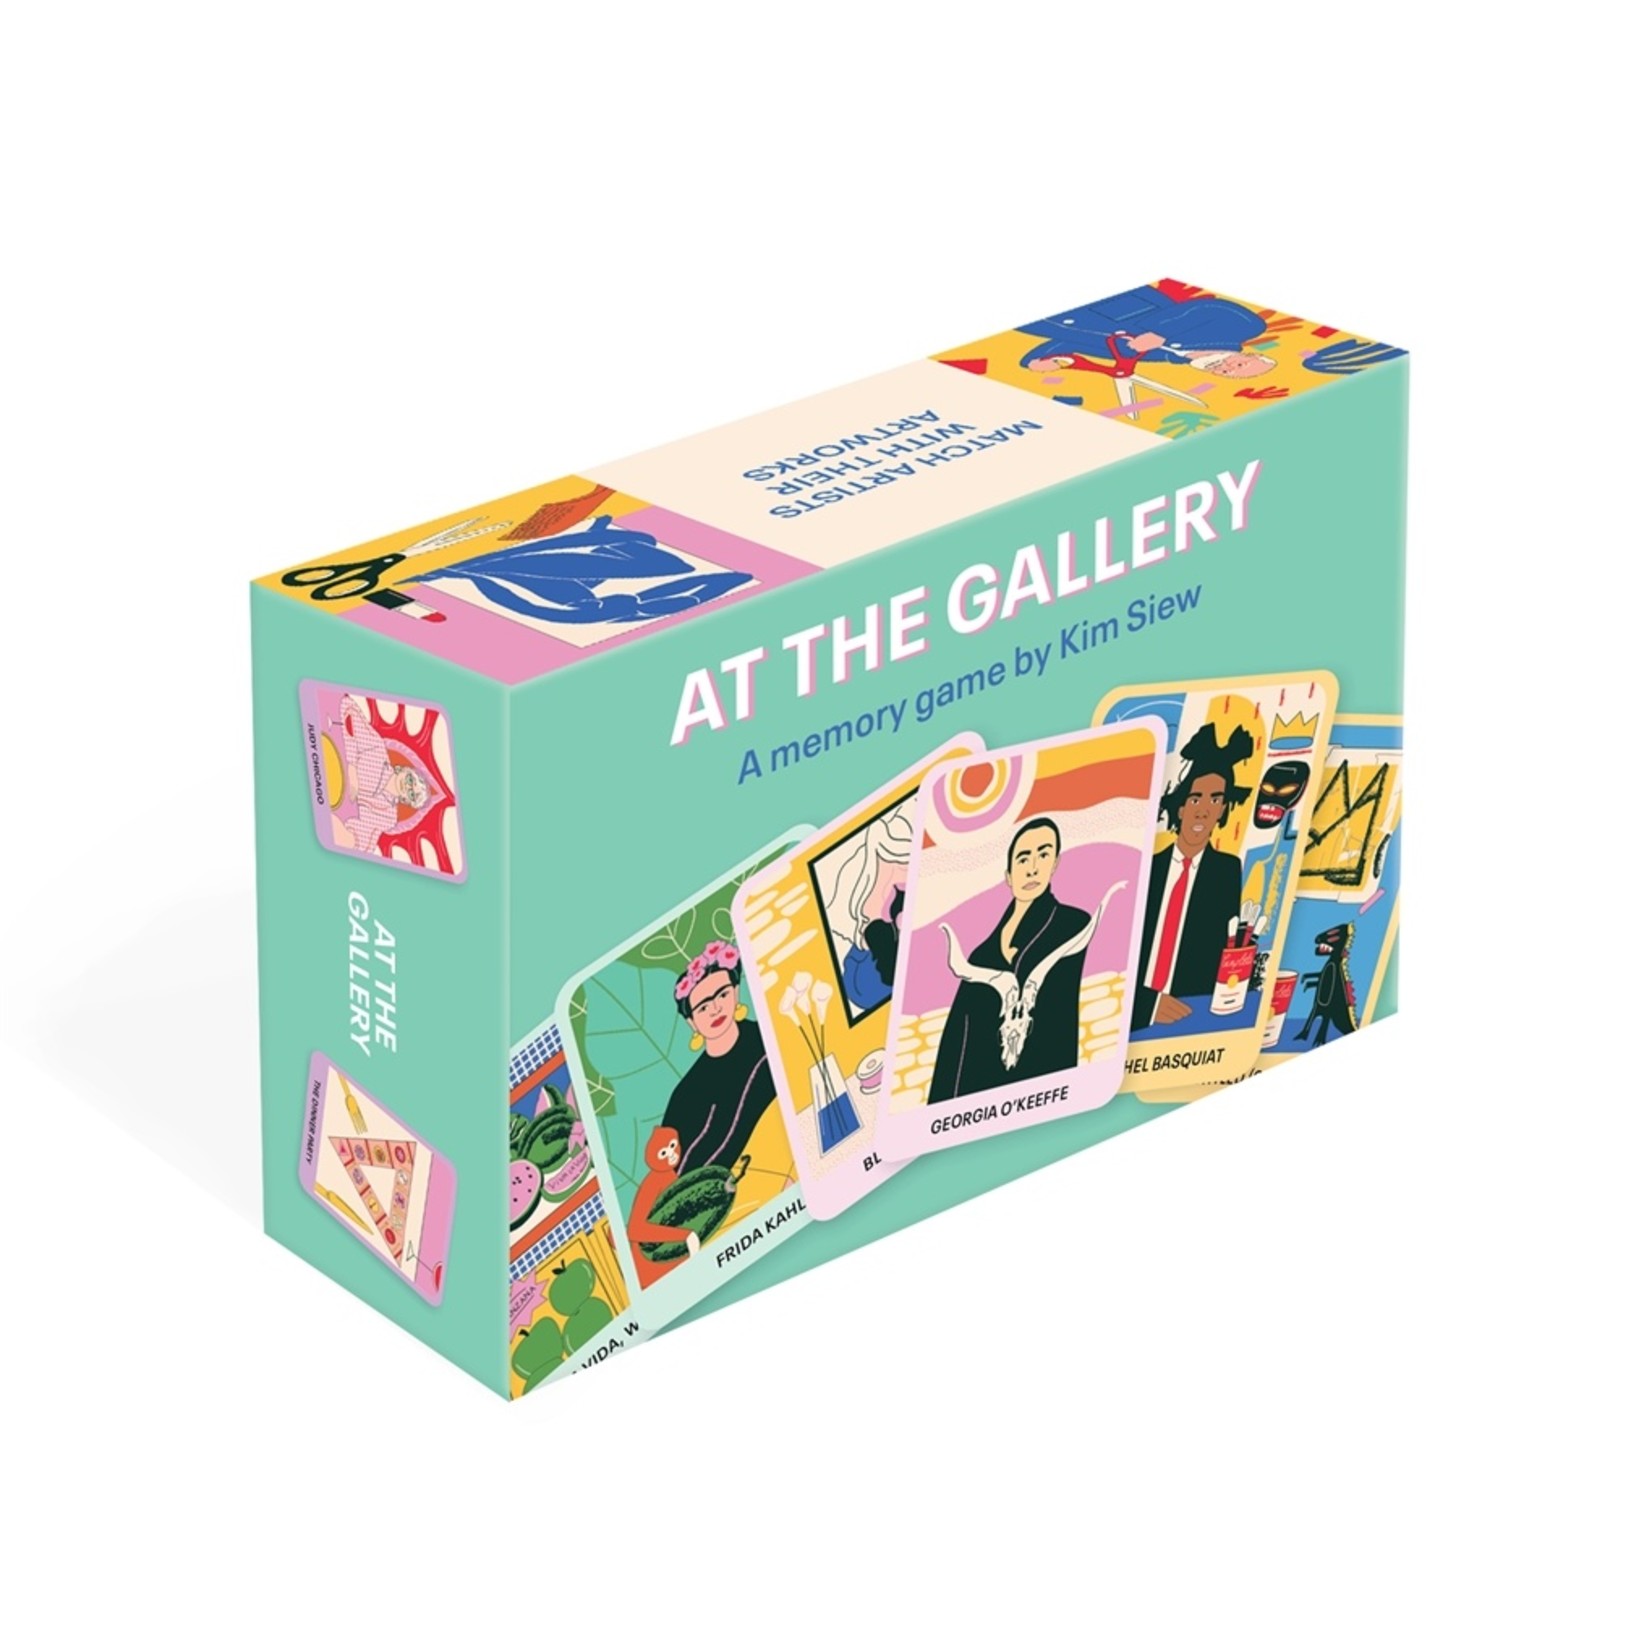 Games At the Gallery Art Memory Game